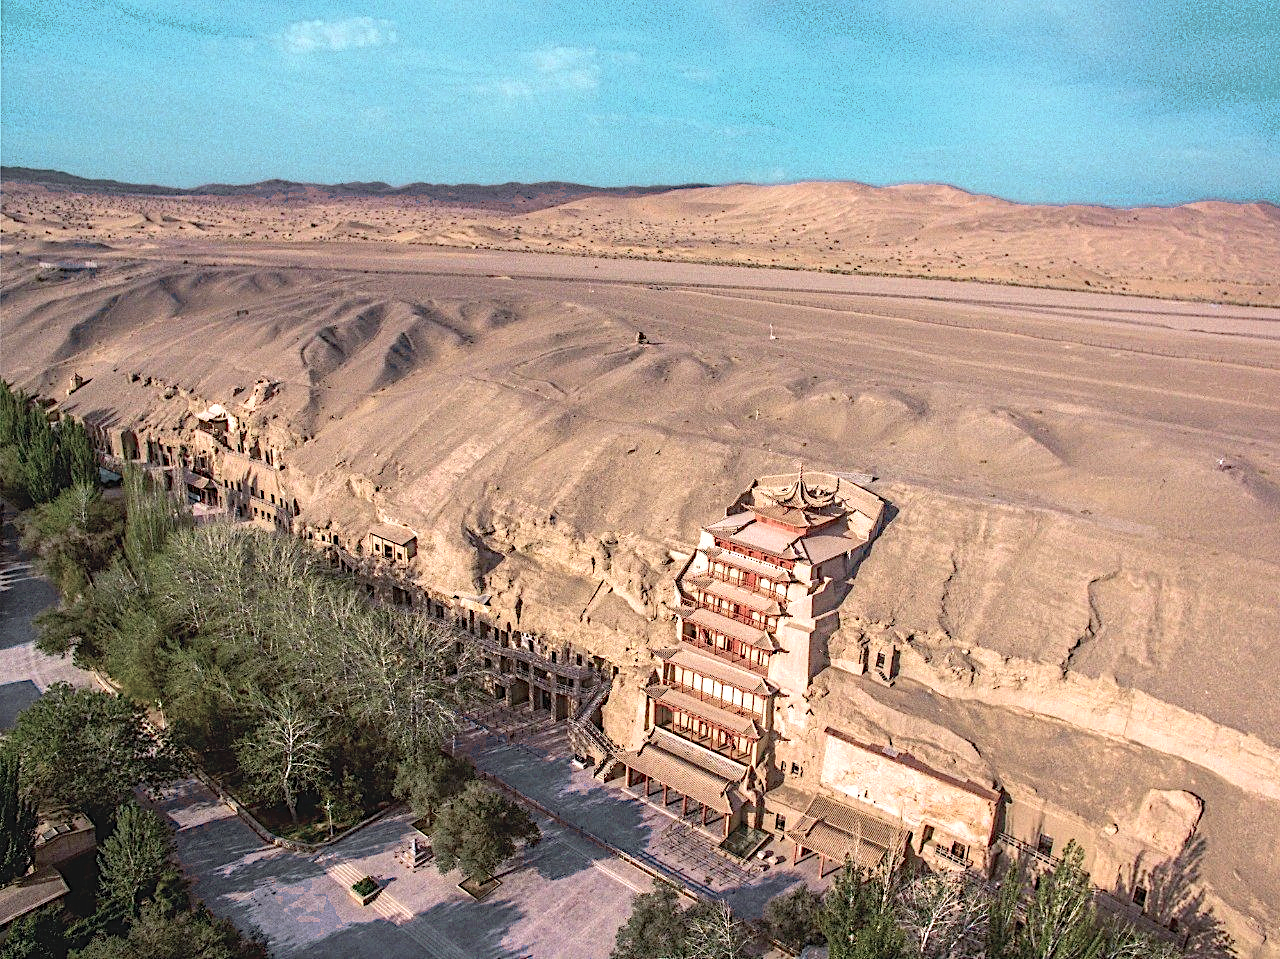 The Mogao caves nowadays